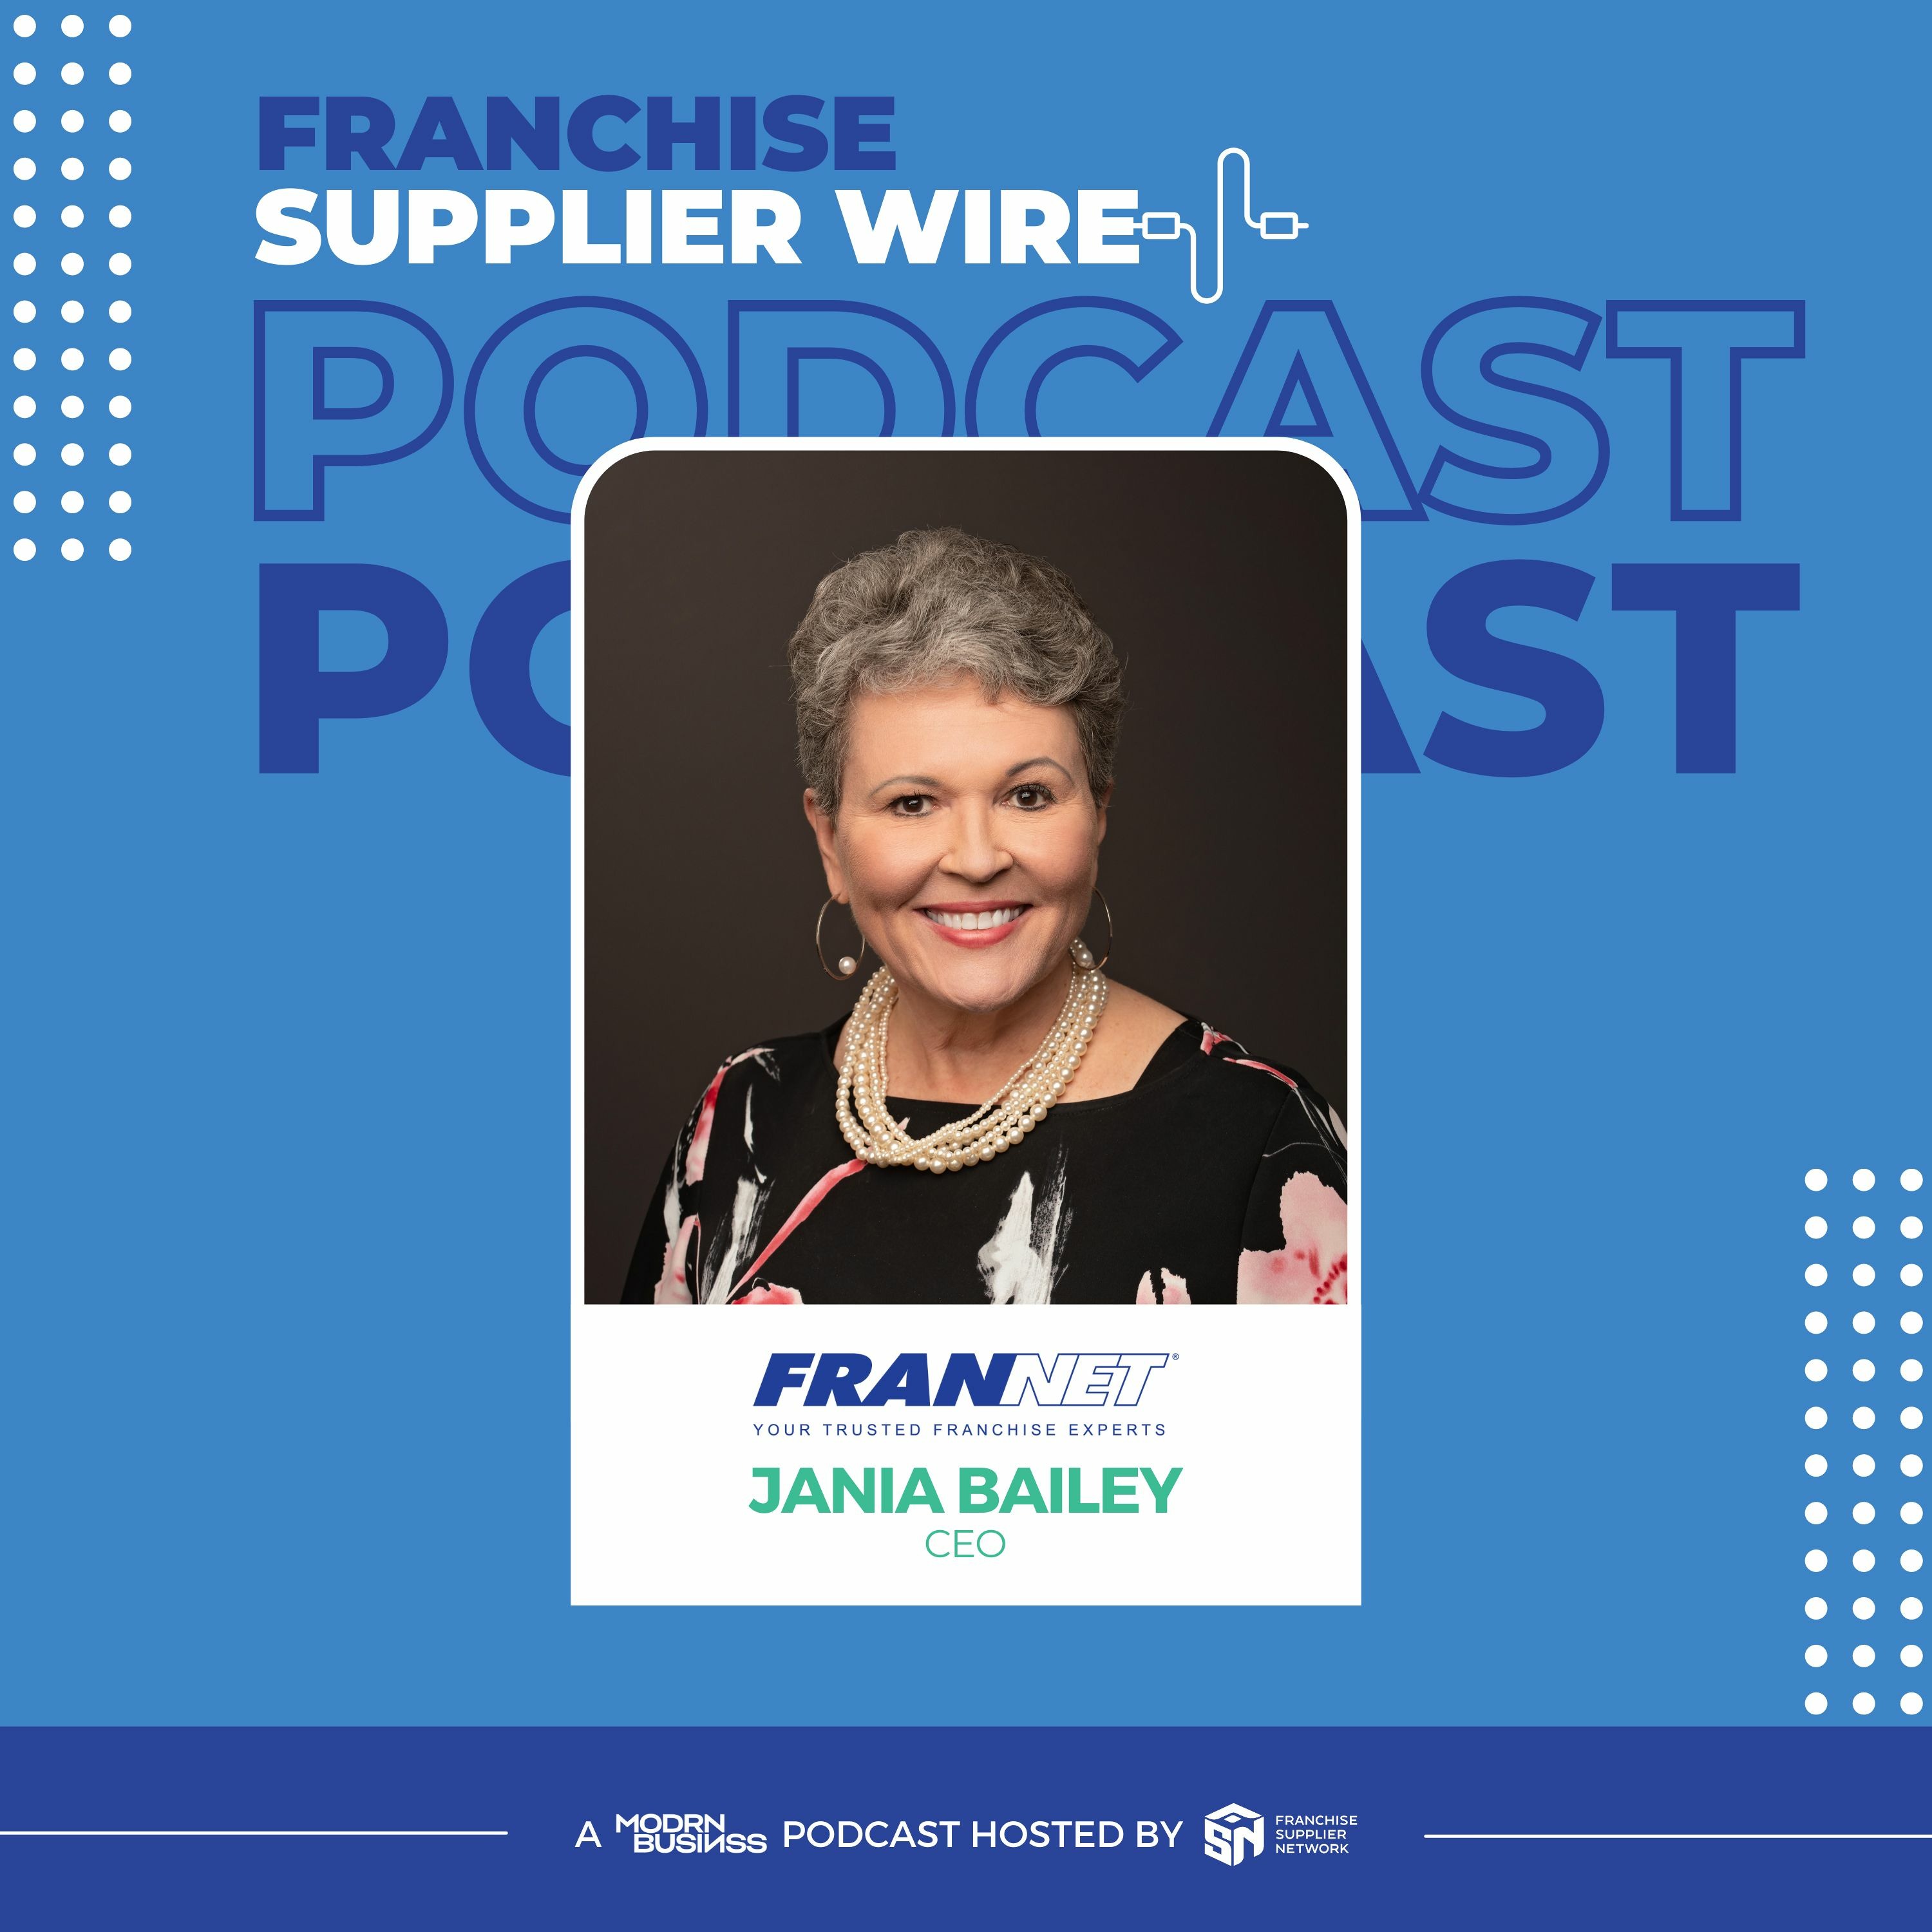 Supplier Wire 021: Find Quality Candidates for your Franchise with Jania Bailey